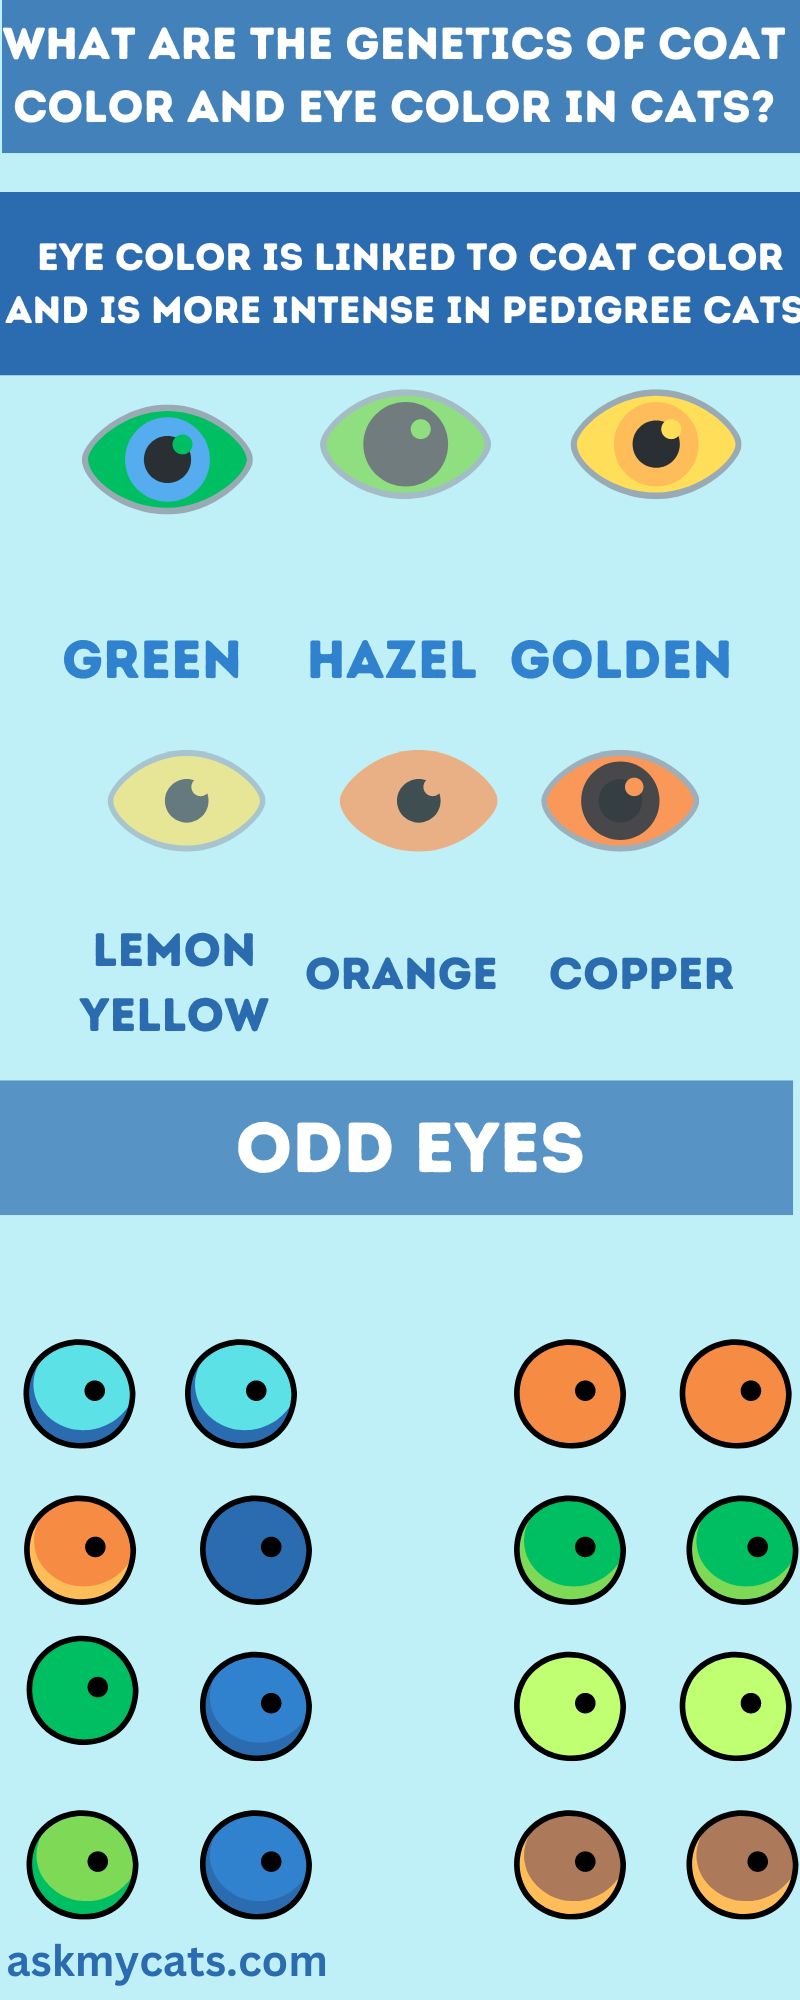 What Are The Genetics Of Coat Color And Eye Color In Cats (Infographic)